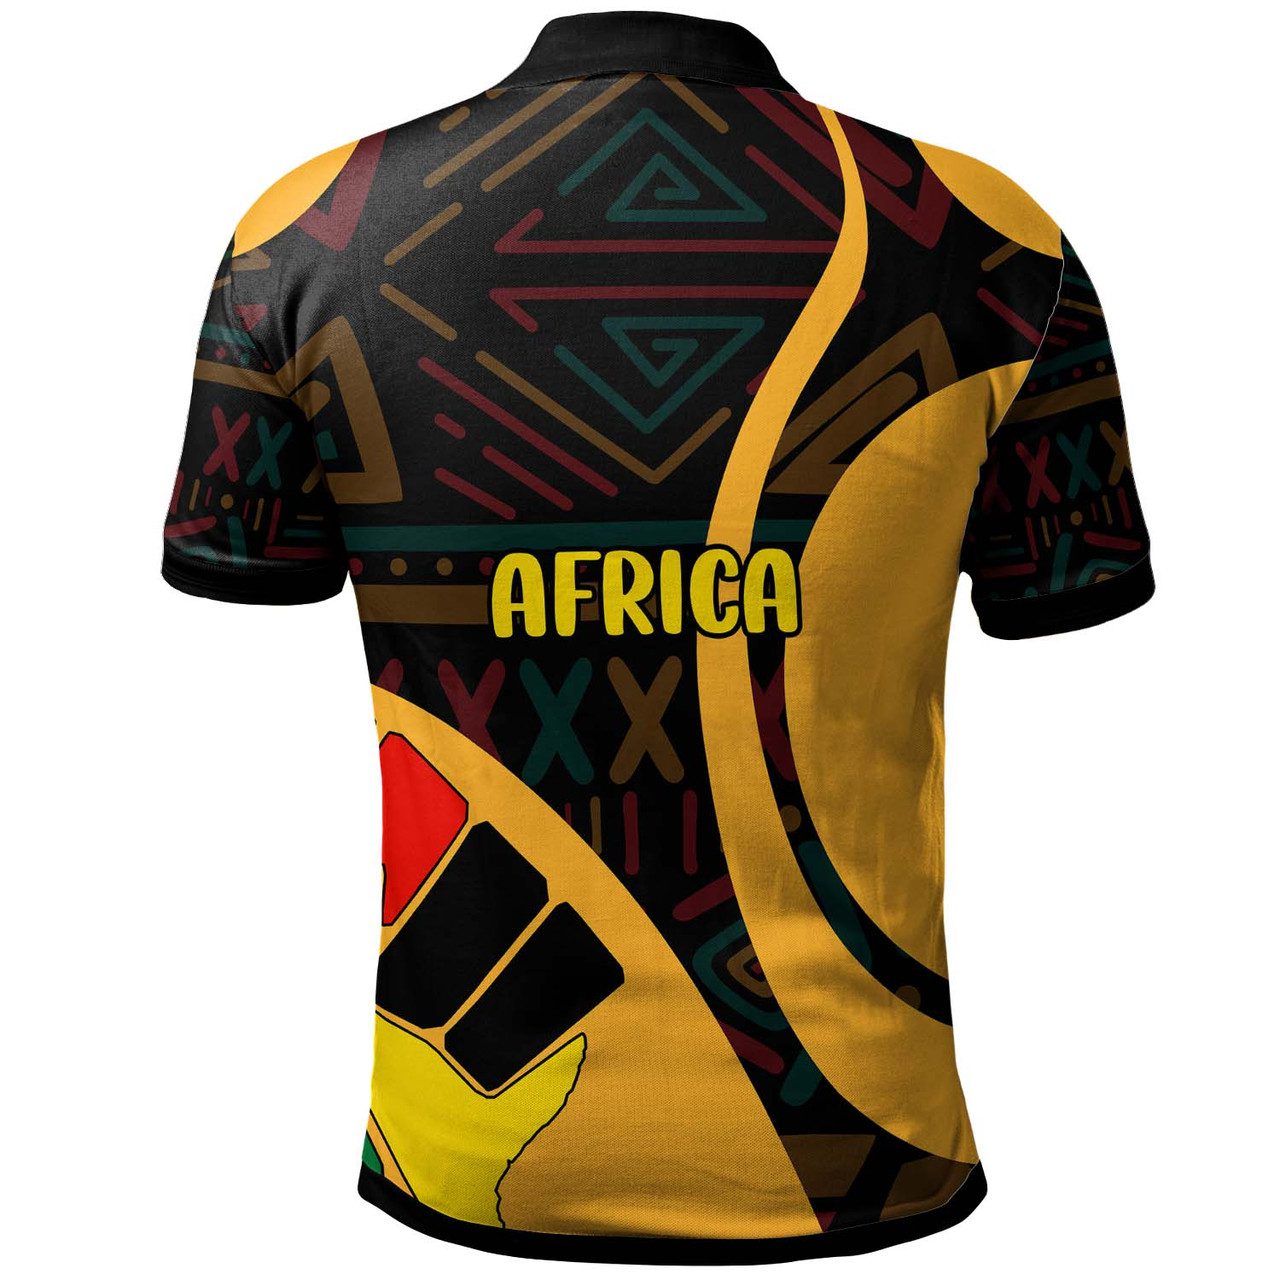 African Polo Shirt – Celebrate Africa’s Woman’s Day with Ethnic Patterns Polo Shirt